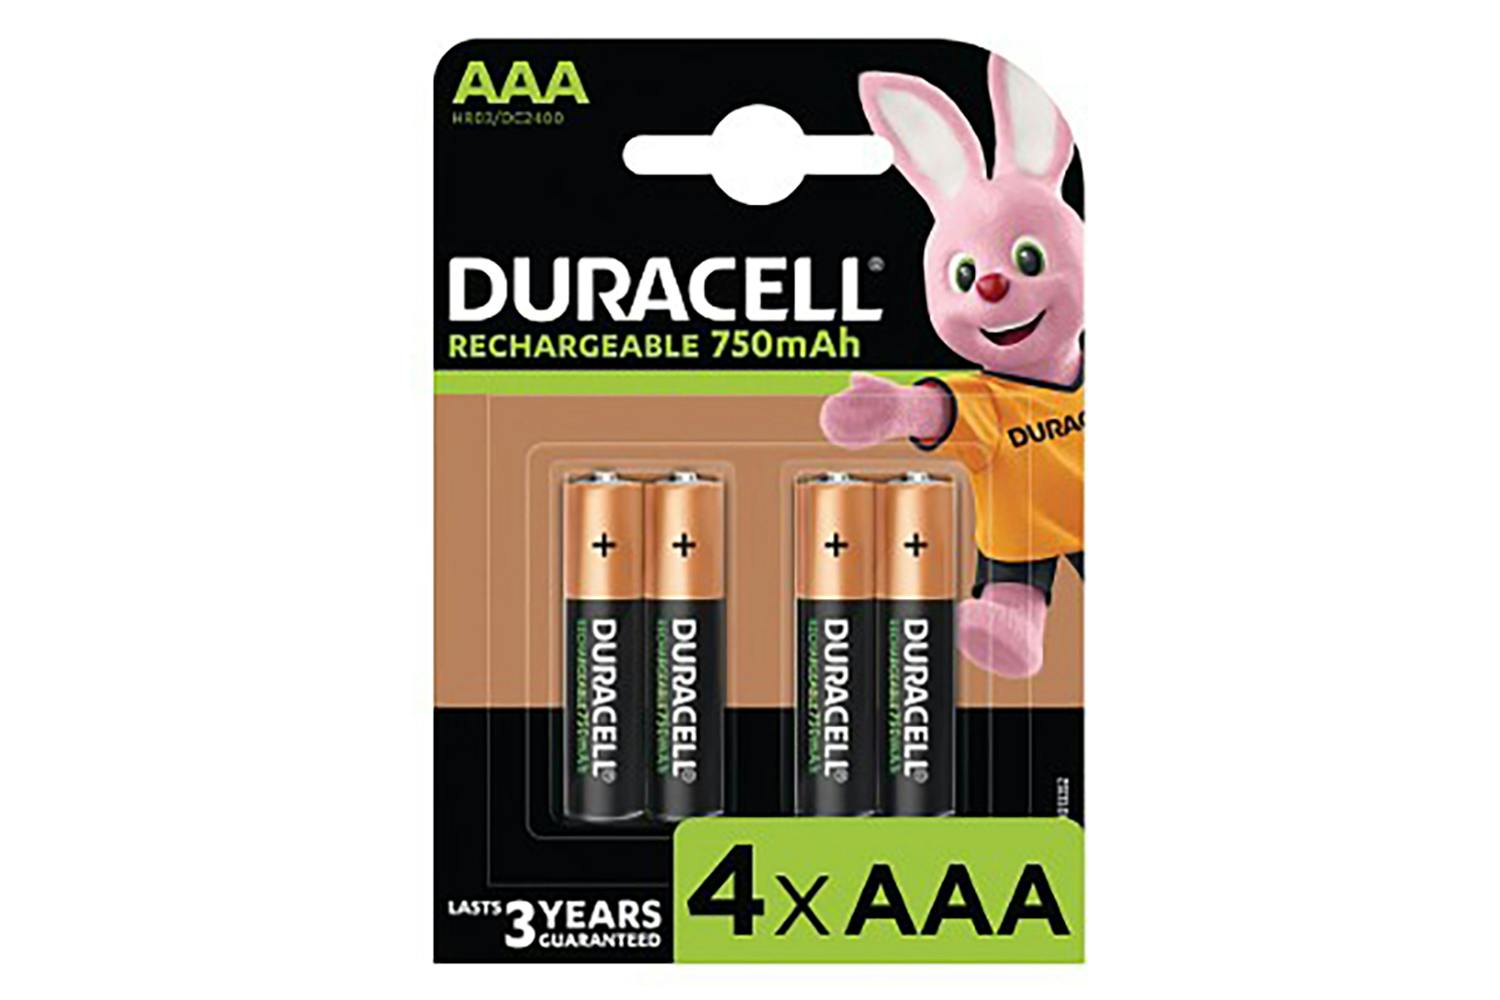 Duracell Rechargeable AAA 750mAh 4 Pack